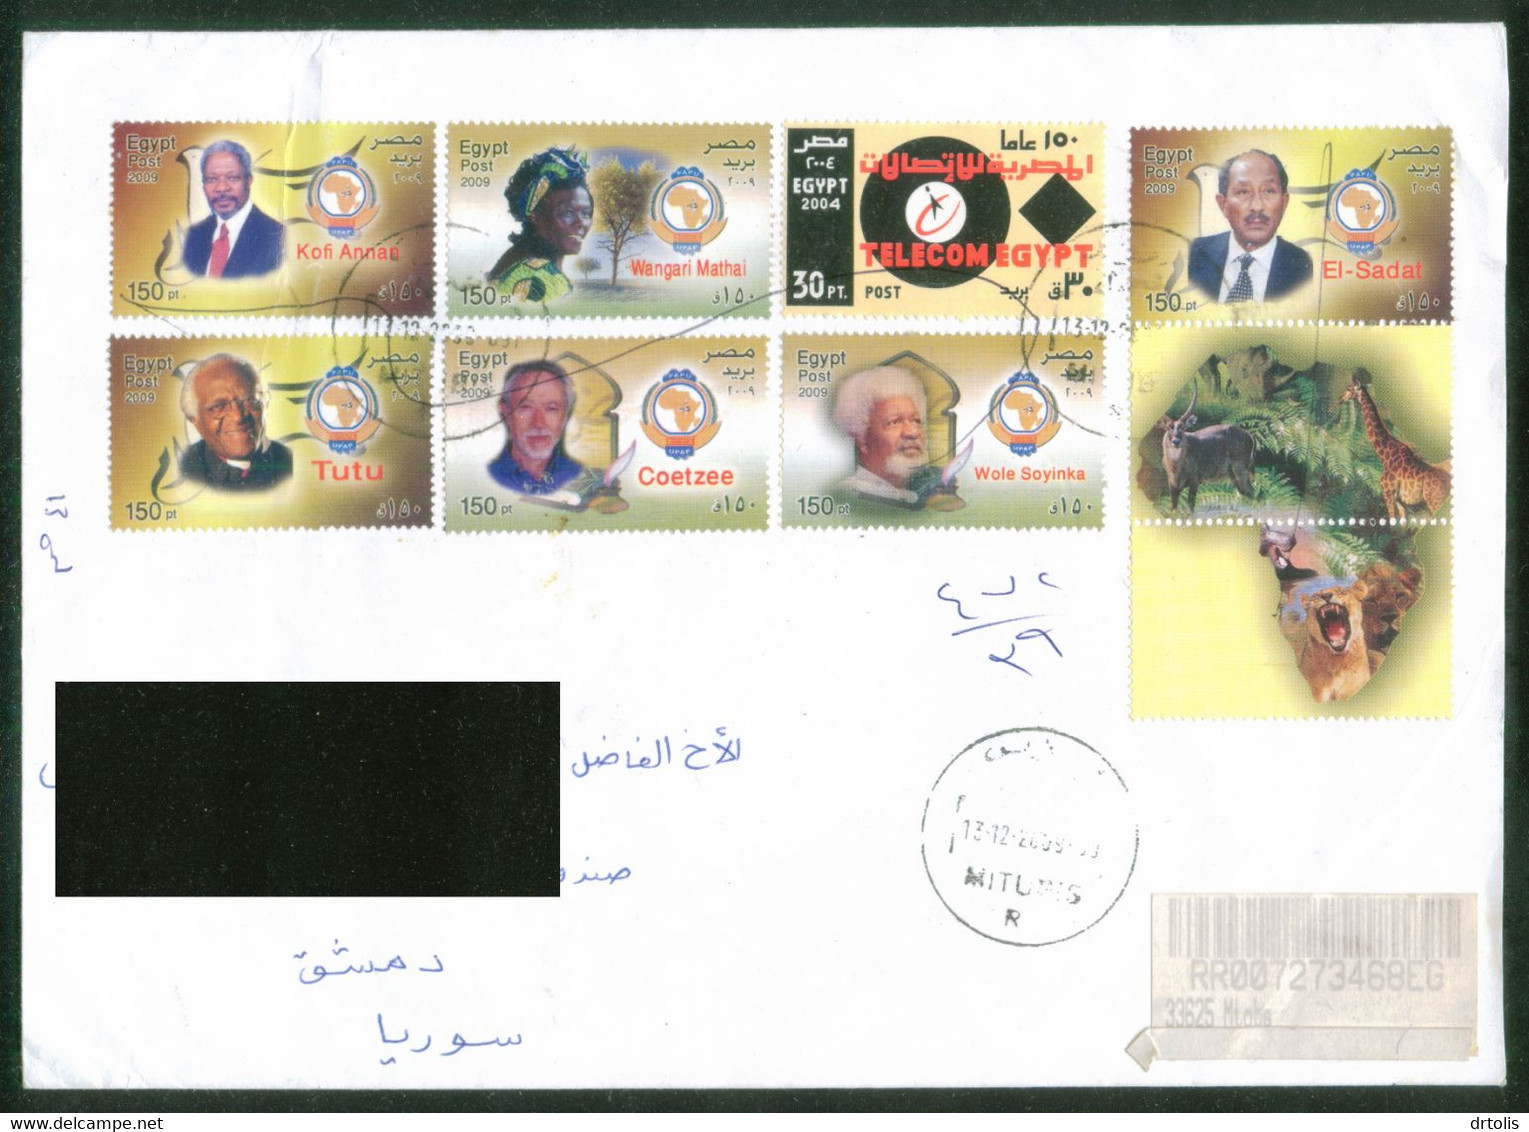 EGYPT / SYRIA / 2004 / THE WITHDRAWN TELECOM STAMP ON COVER TO SYRIA - Covers & Documents